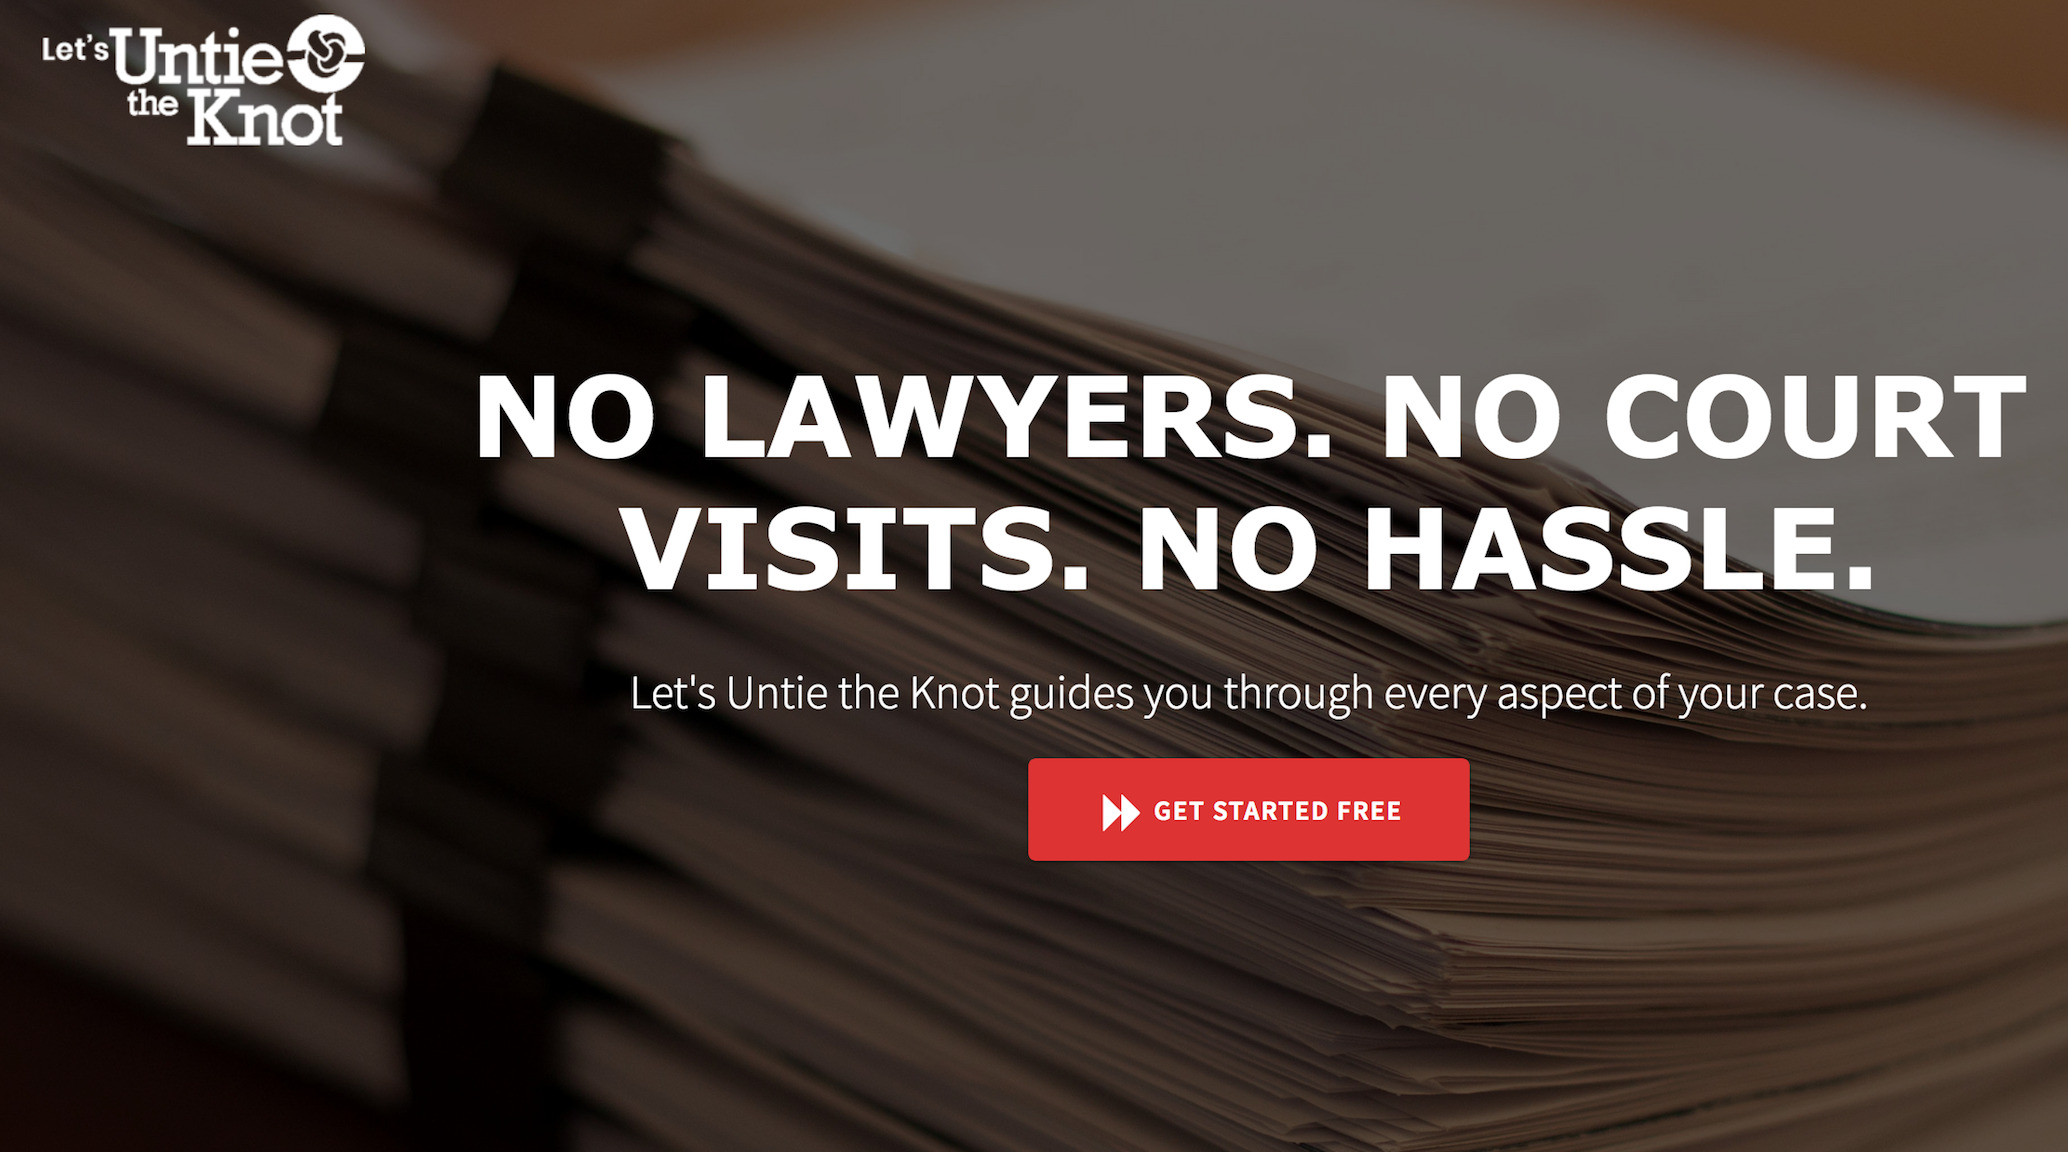 Let's Untie the Knot is a new lawyer-free, court-free, hassle-free online resource to file for uncontested divorce in Oregon.